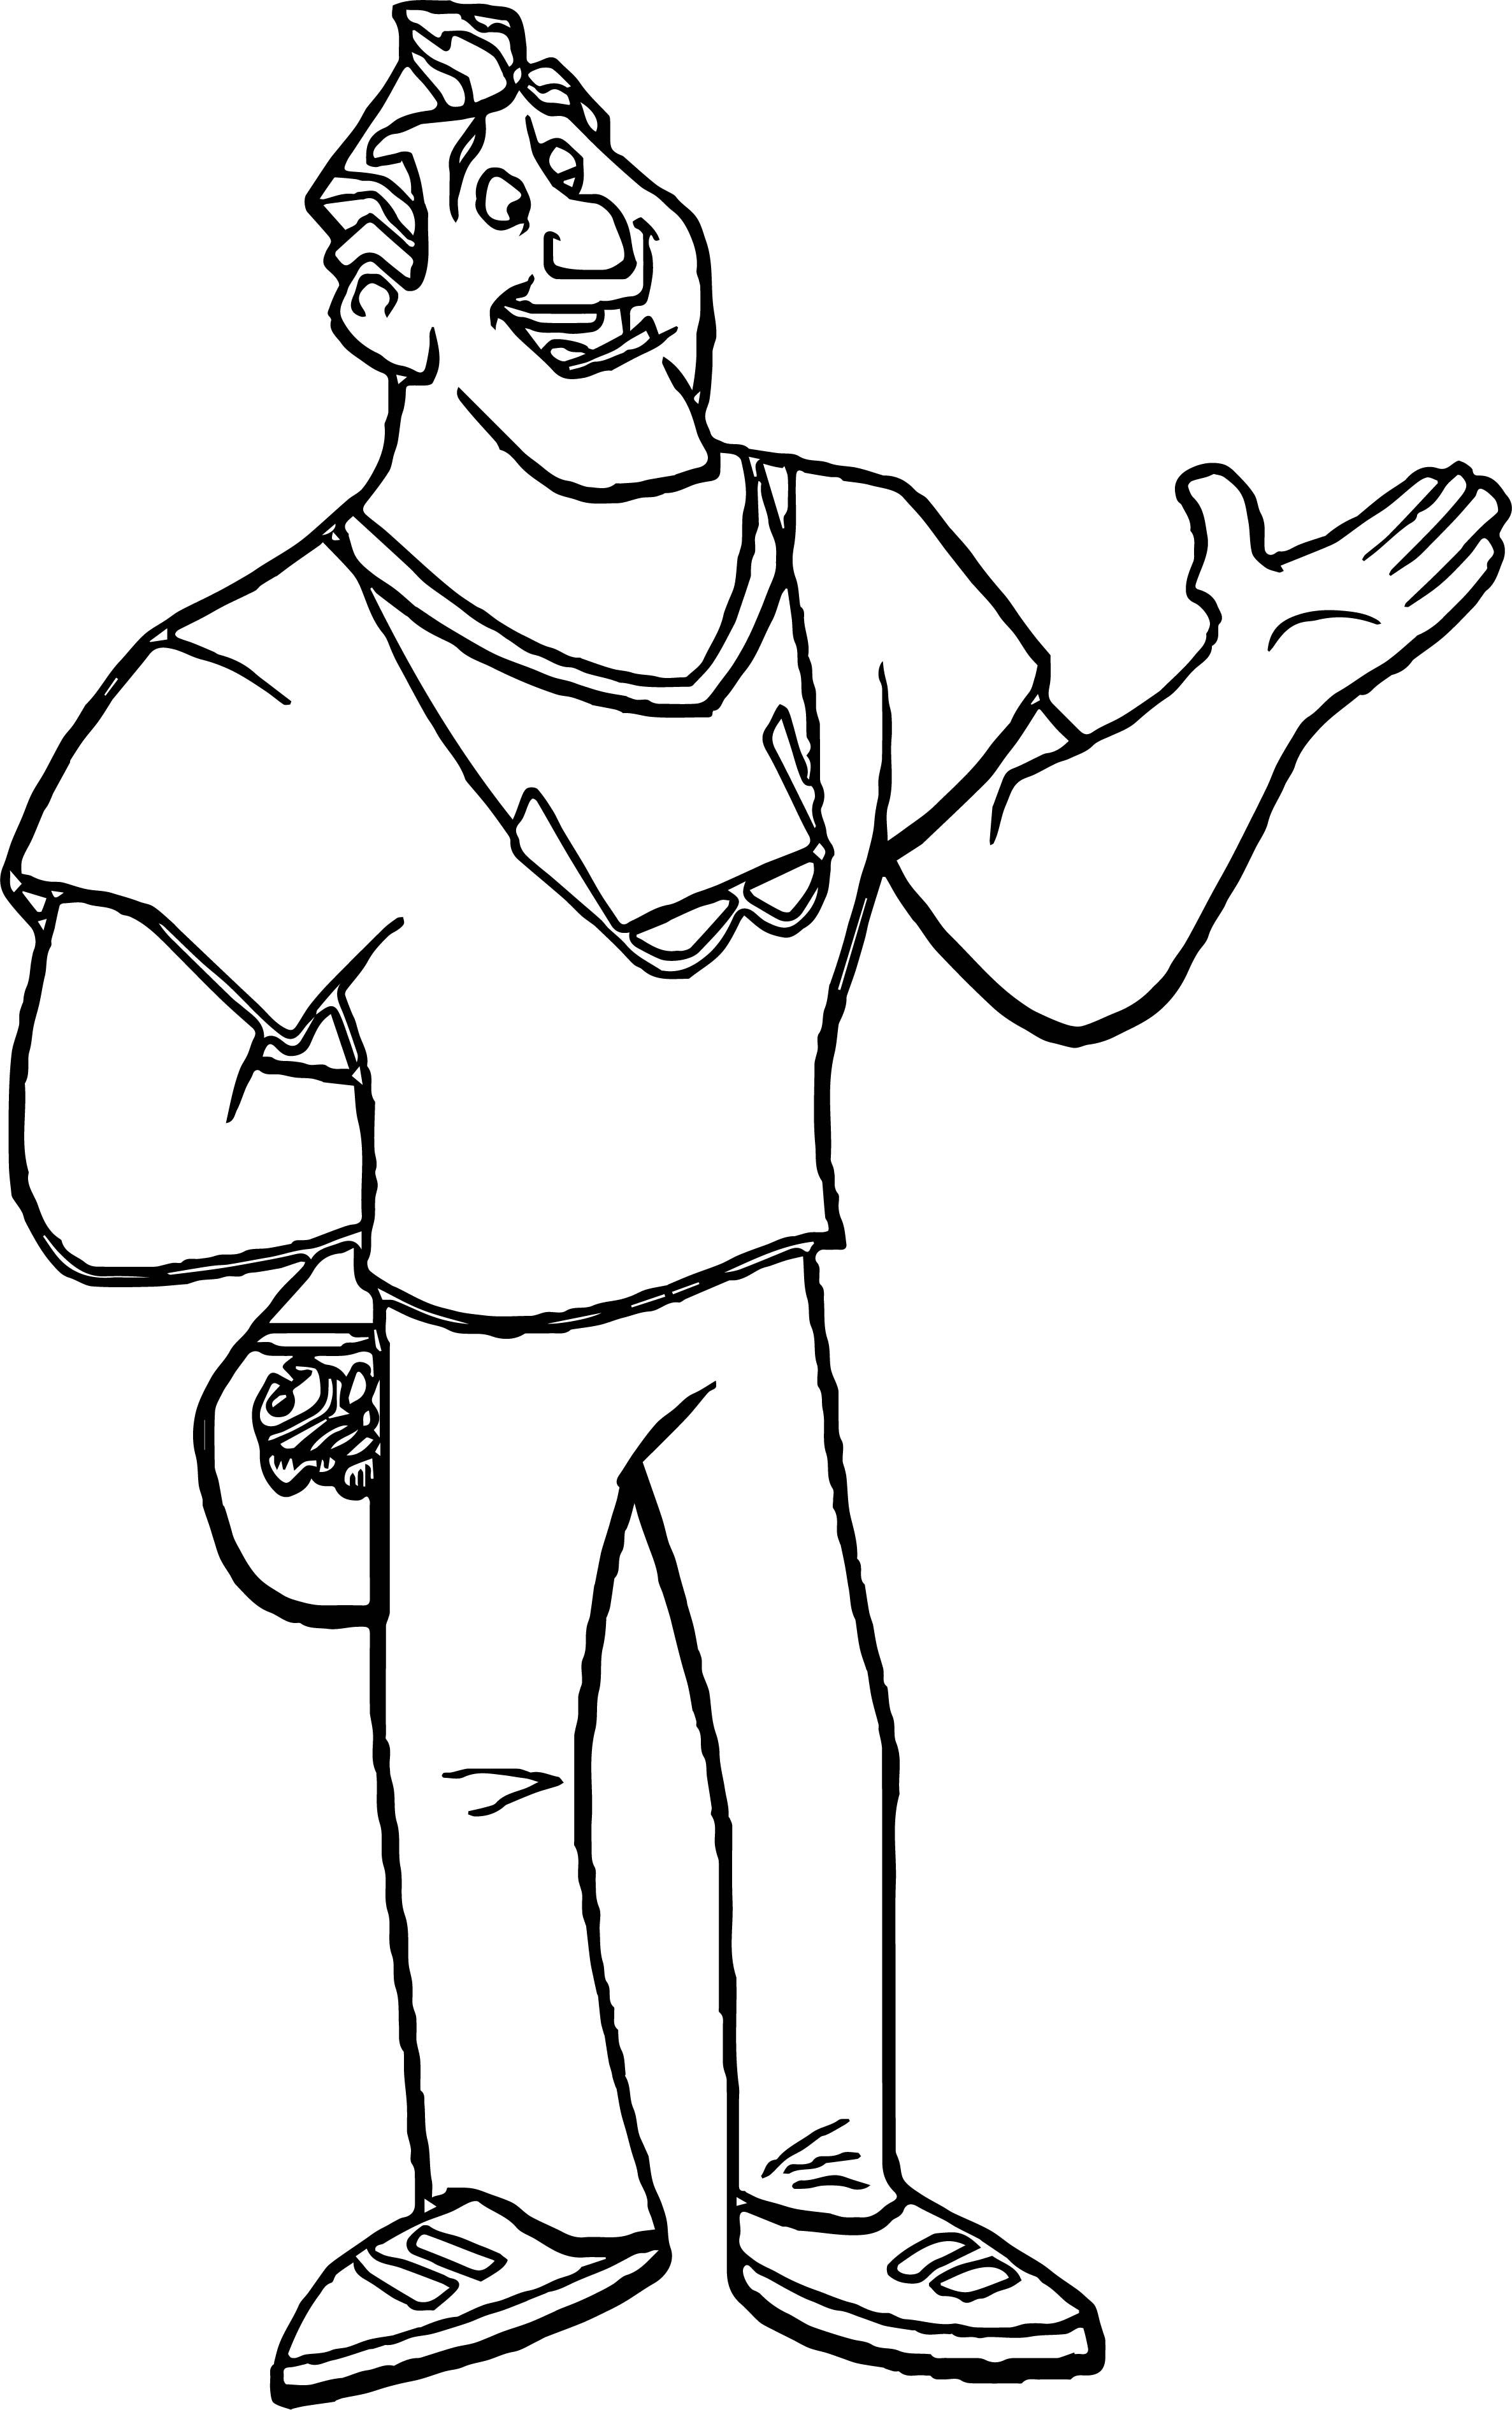 Disney Finding Nemo Man Coloring Pages